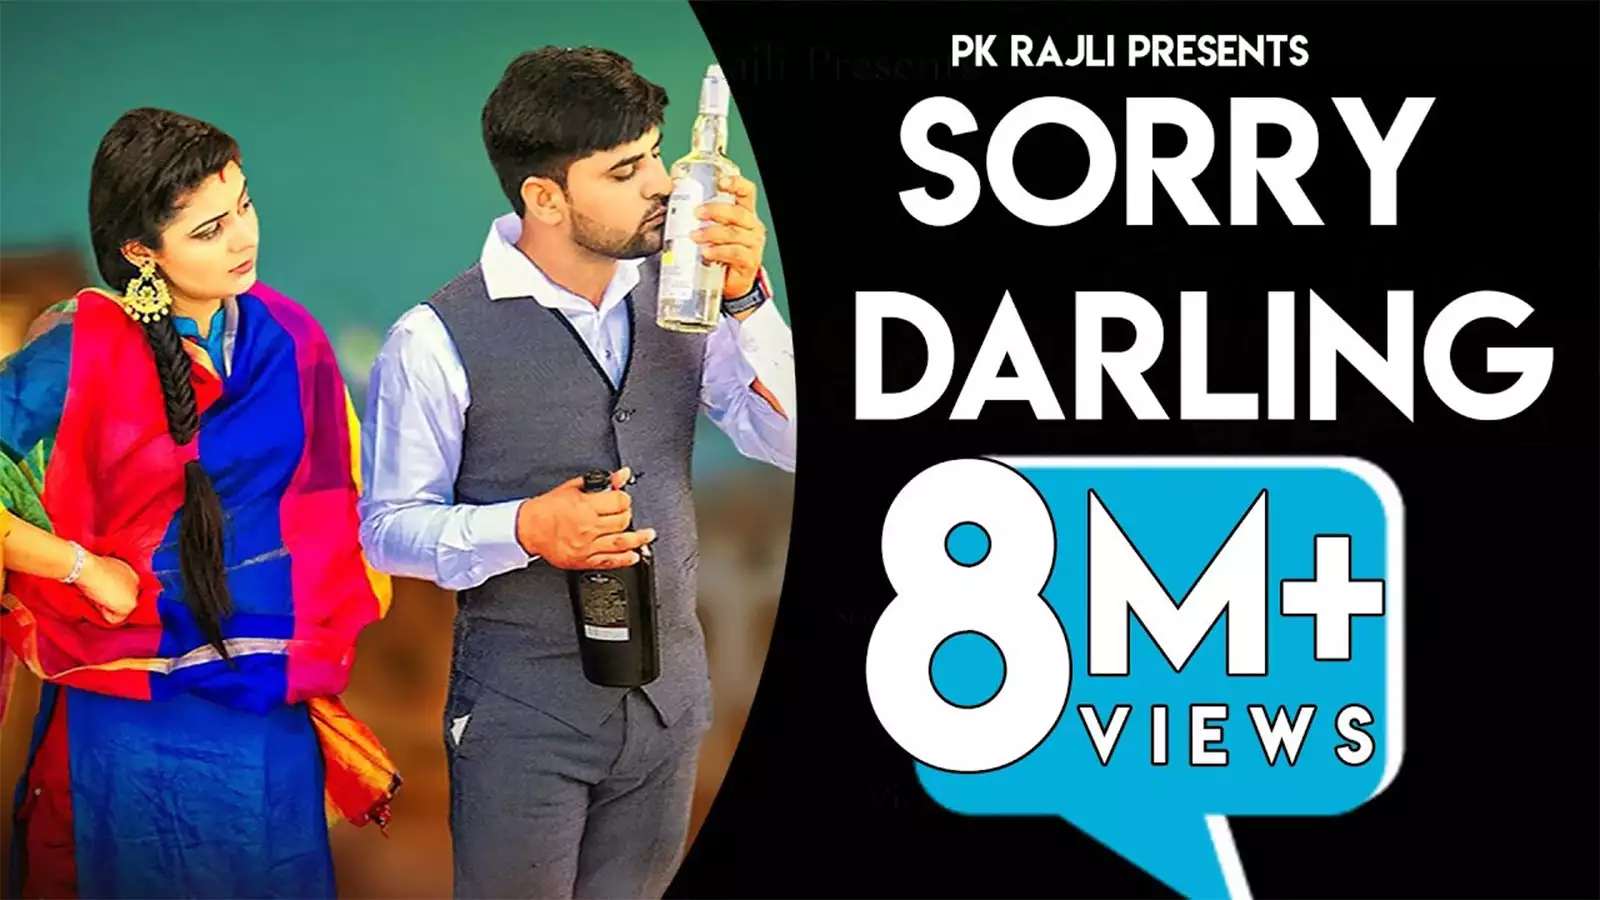 sorry darling song download mp3